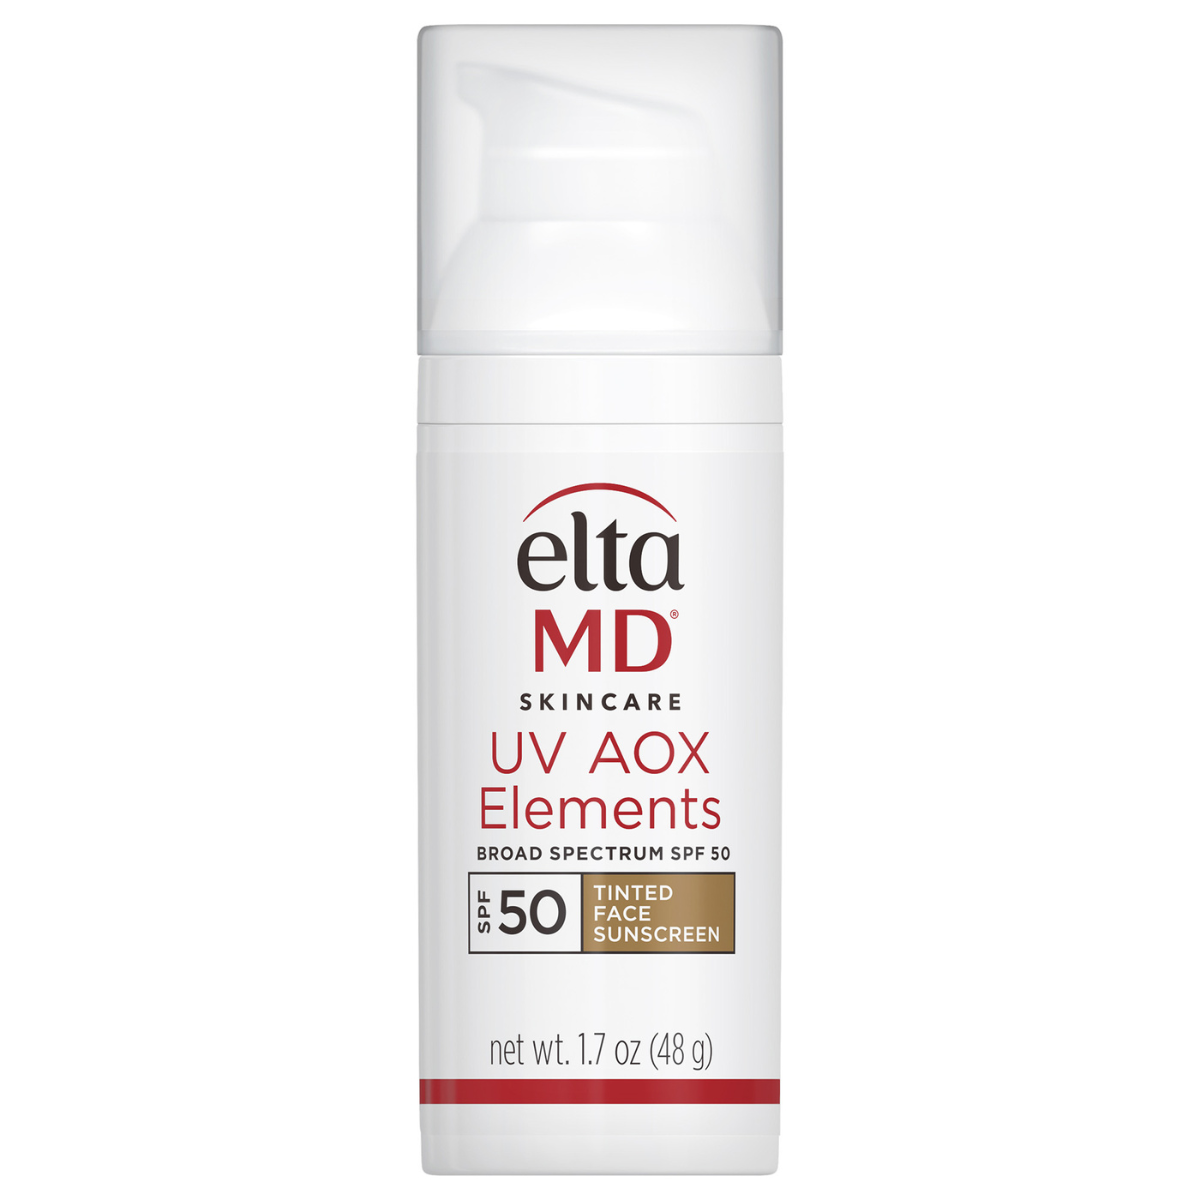 EltaMD UV AOX Elements SPF 50 Tinted Face Sunscreen shop at Exclusive Beauty